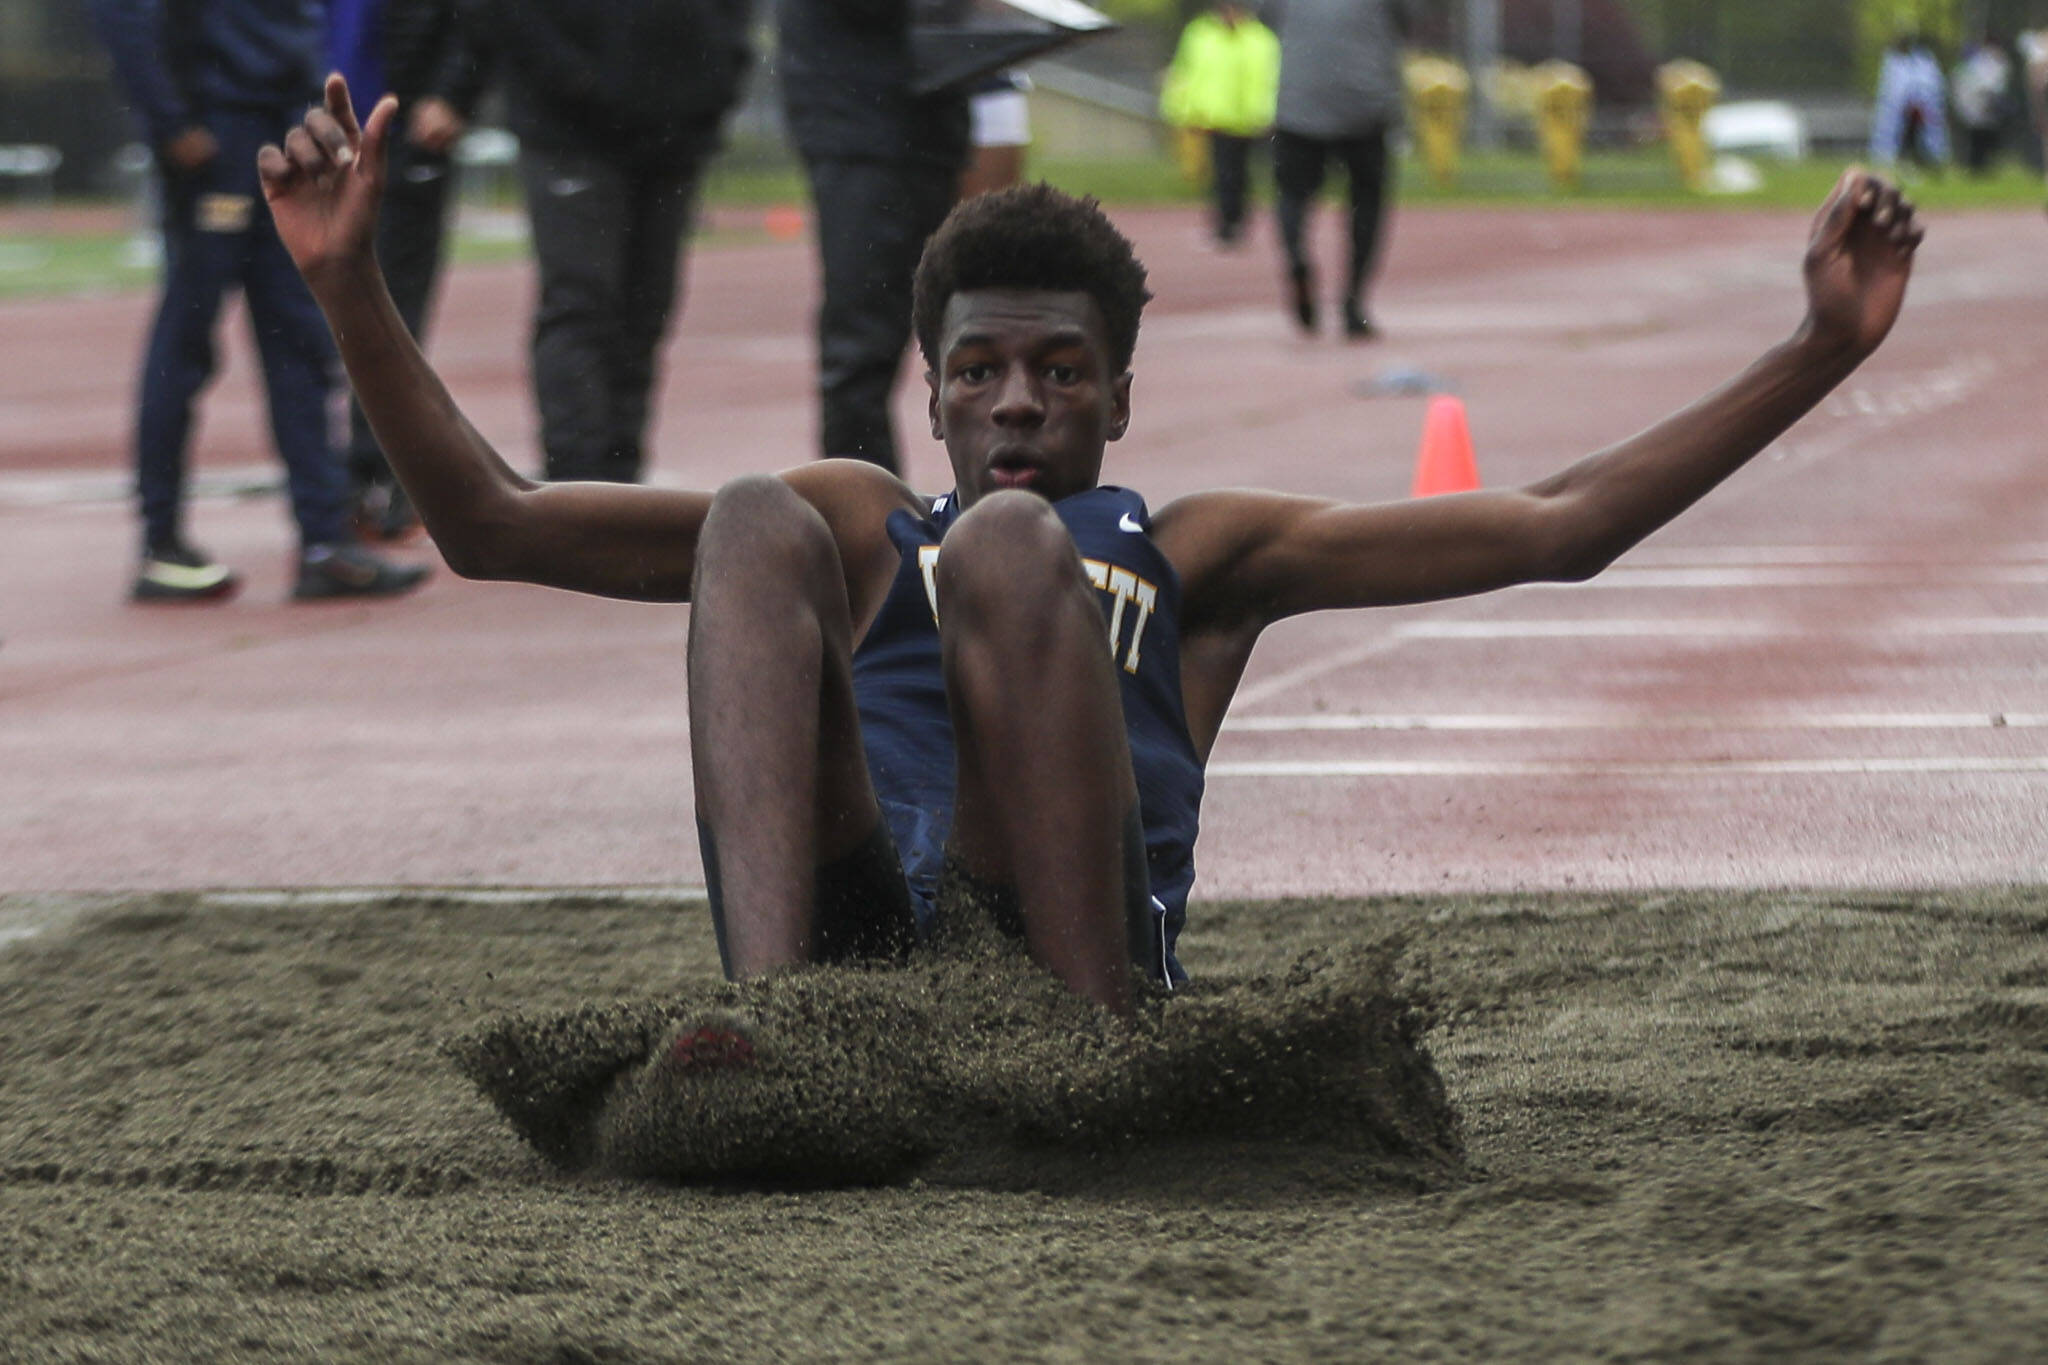 Everett High School’s Shukurani Ndayiragije is a contender to win all three jumping events at the Class 3A state boys track and field meet. (Annie Barker / The Herald)